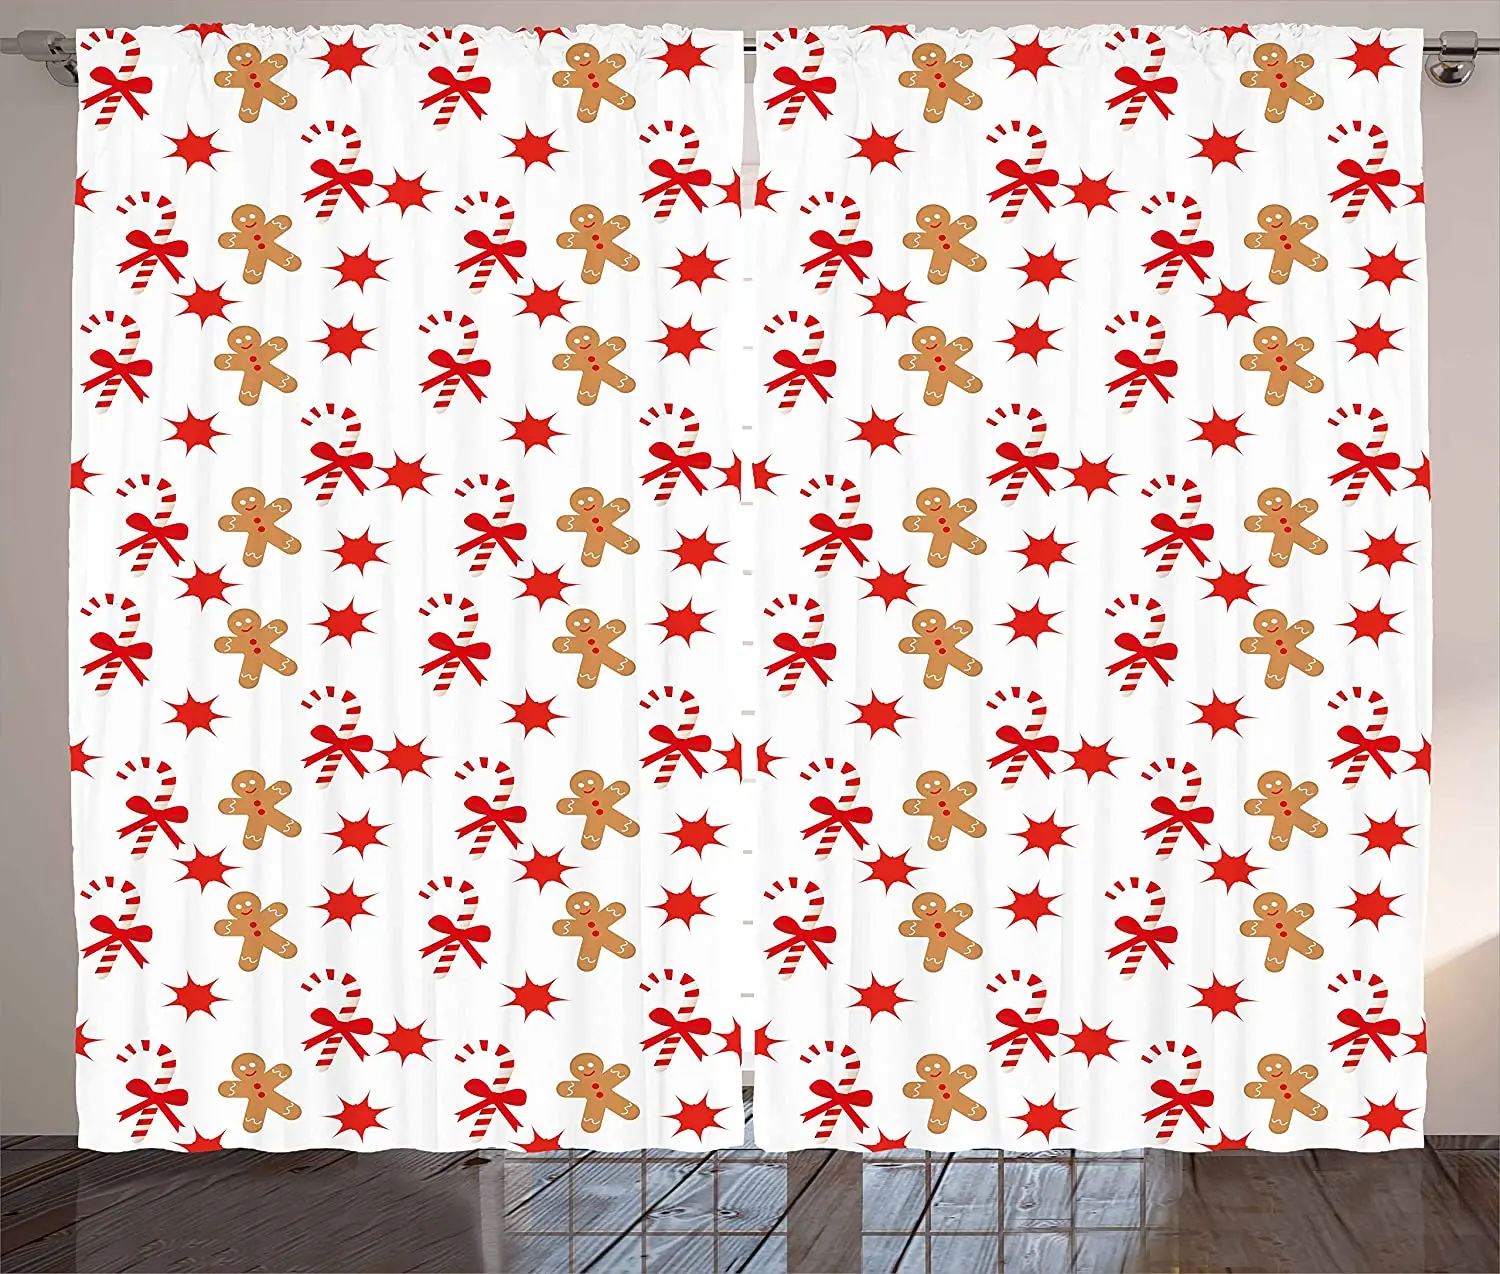 

Gingerbread Man Blackout Curtains Candy Cane with Bowties Red Star Figures Gingerbread Man Pattern Window Curtain